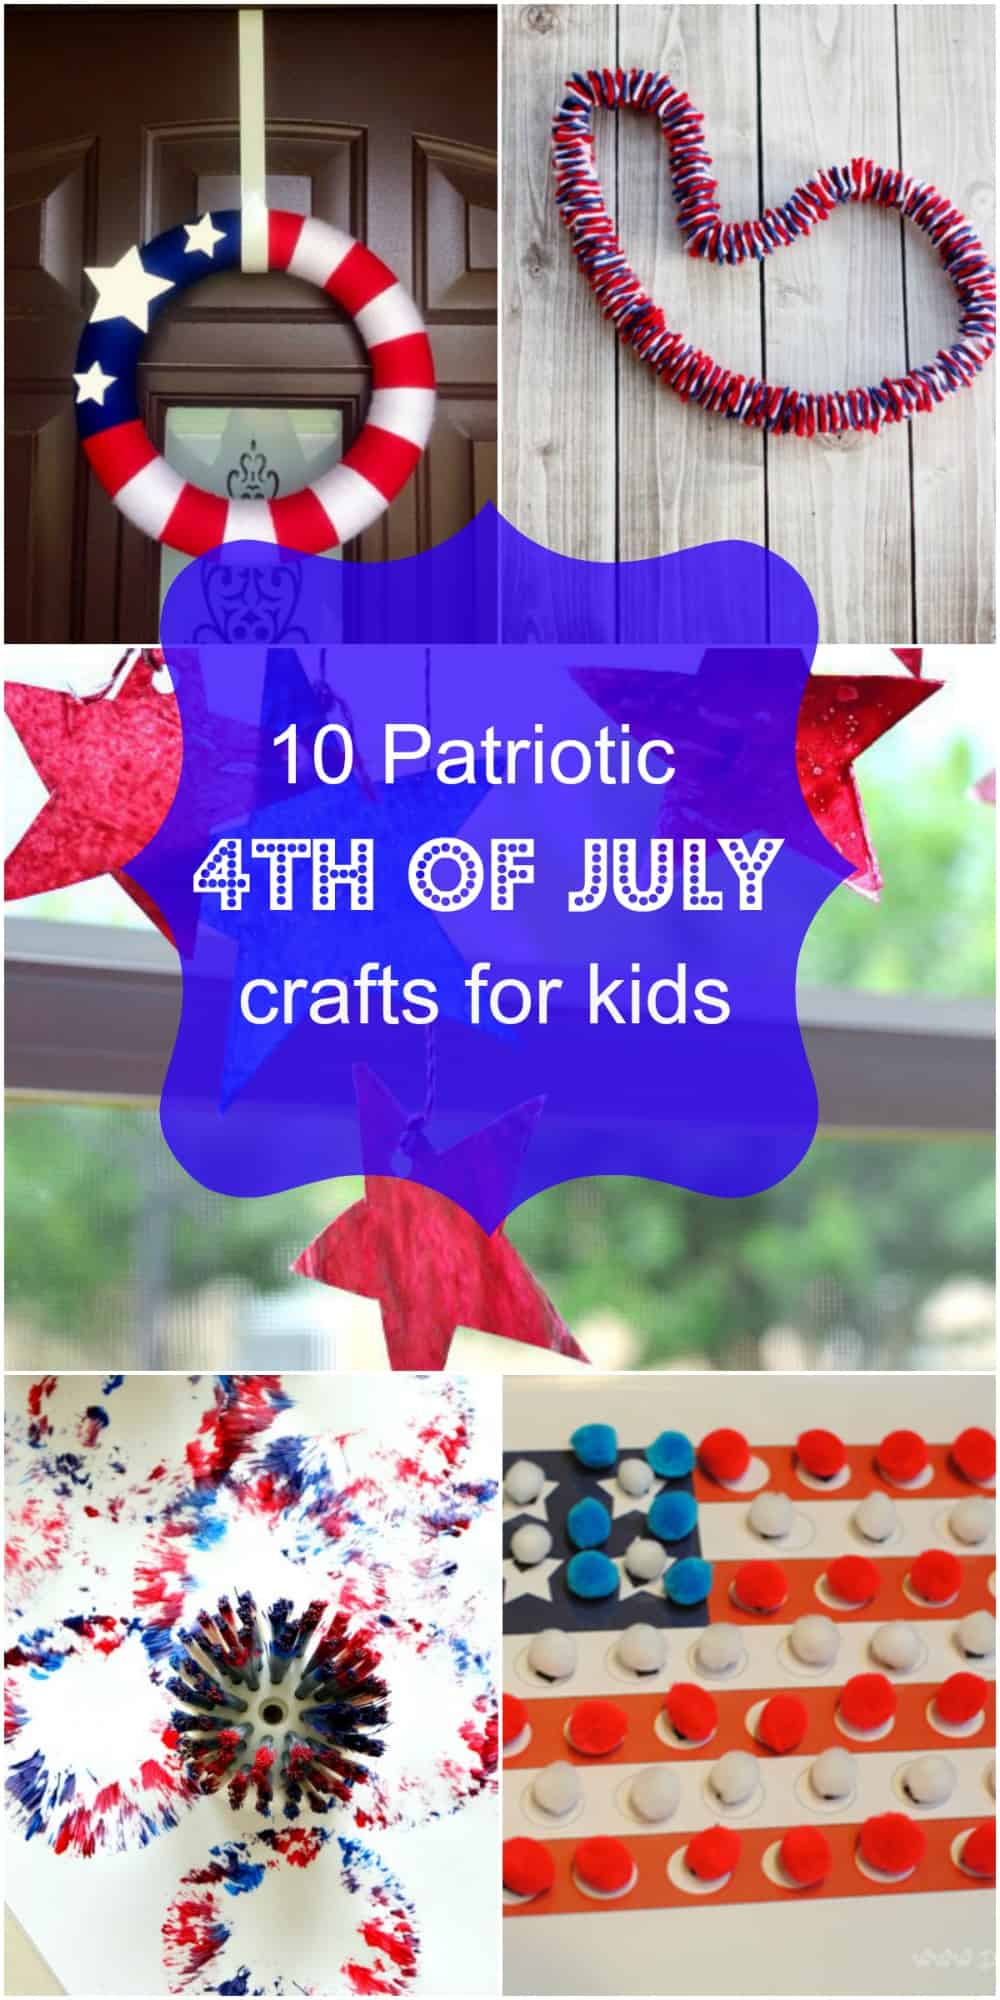 10 Patriotic 4th of July Crafts For Kids To Make!